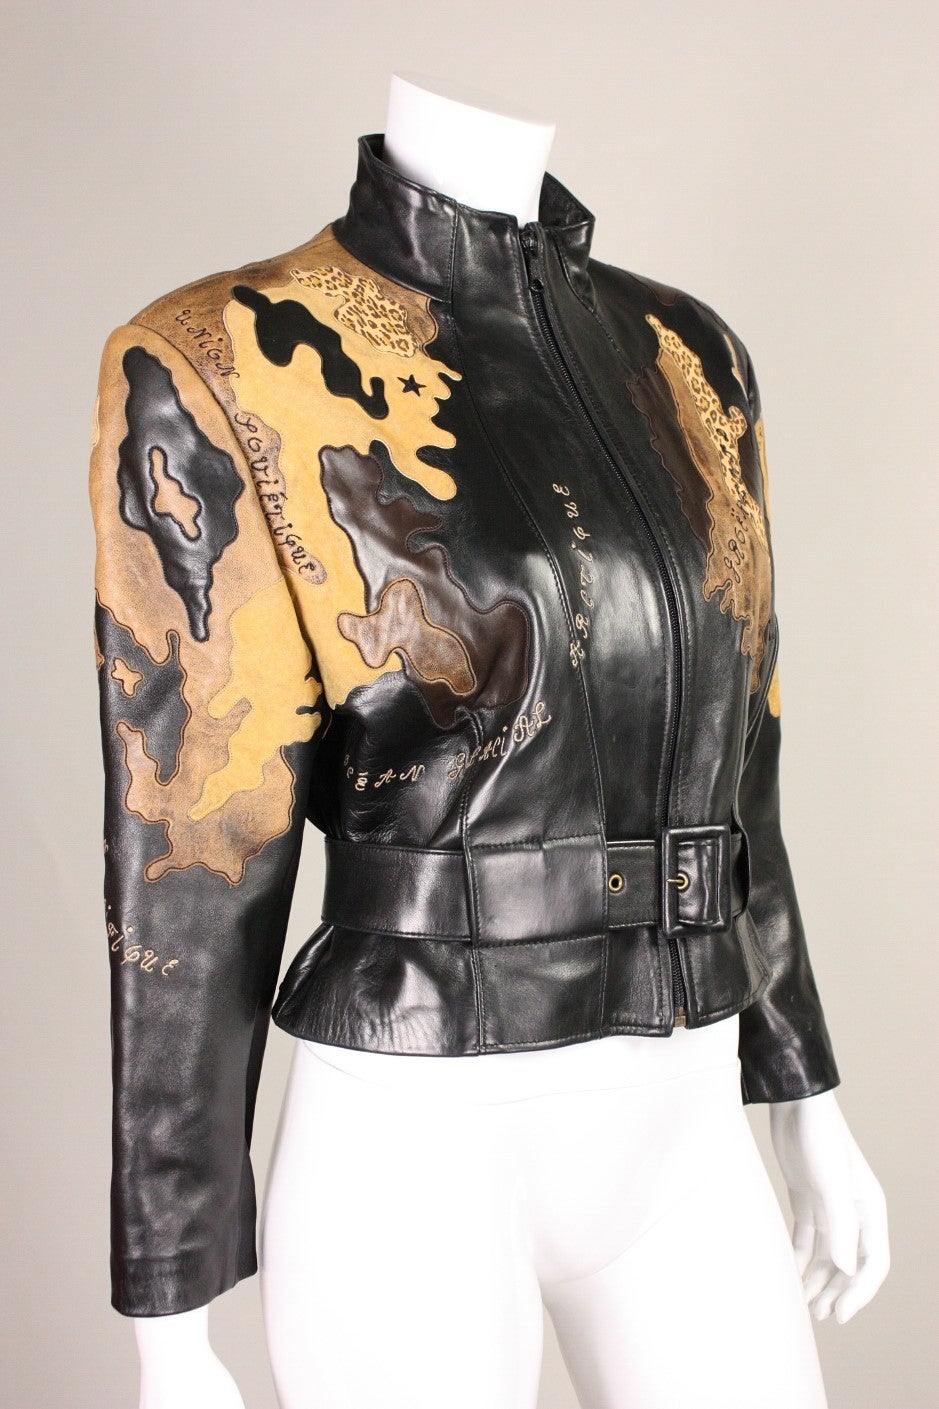 Superb jacket from Jean Claude Jitrois dates to the 1990's and is made of buttery soft leather with a map of the world appliqued on.  Stand collar.  Fully lined.  Belted waist. Center front zipper.

Fits a size 4-6 US.